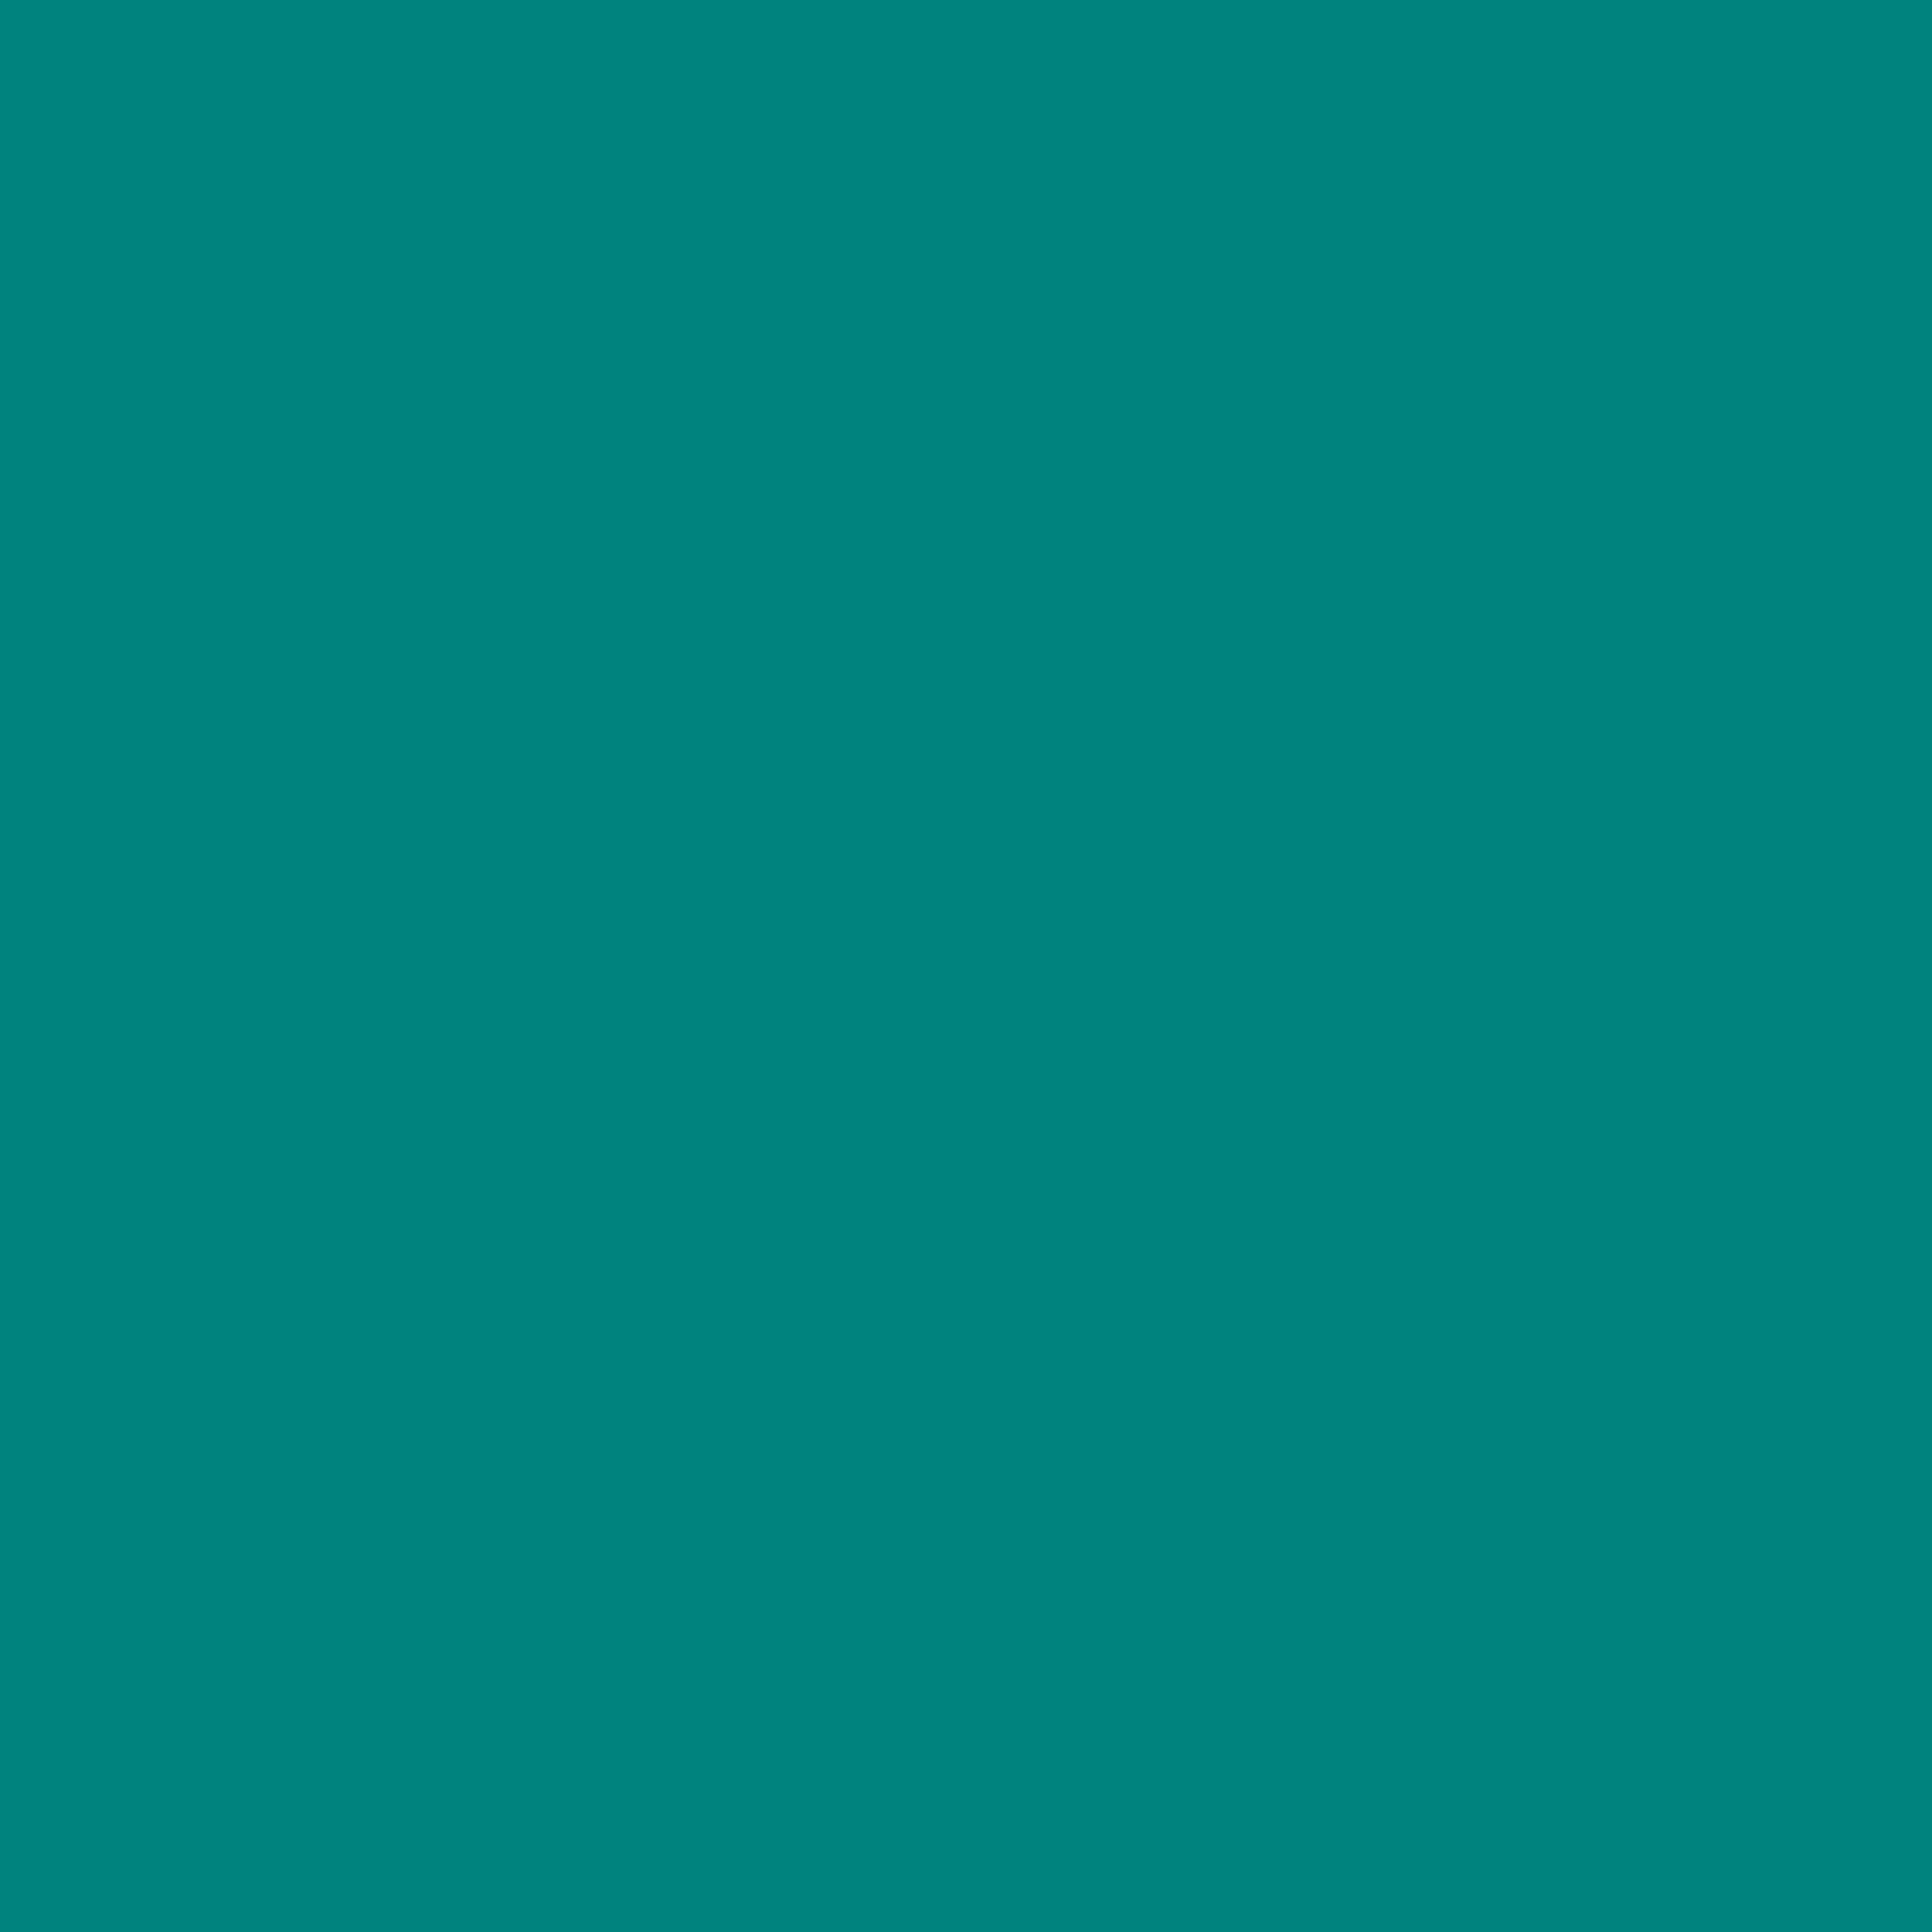 2732x2732 Teal Green Solid Color Background